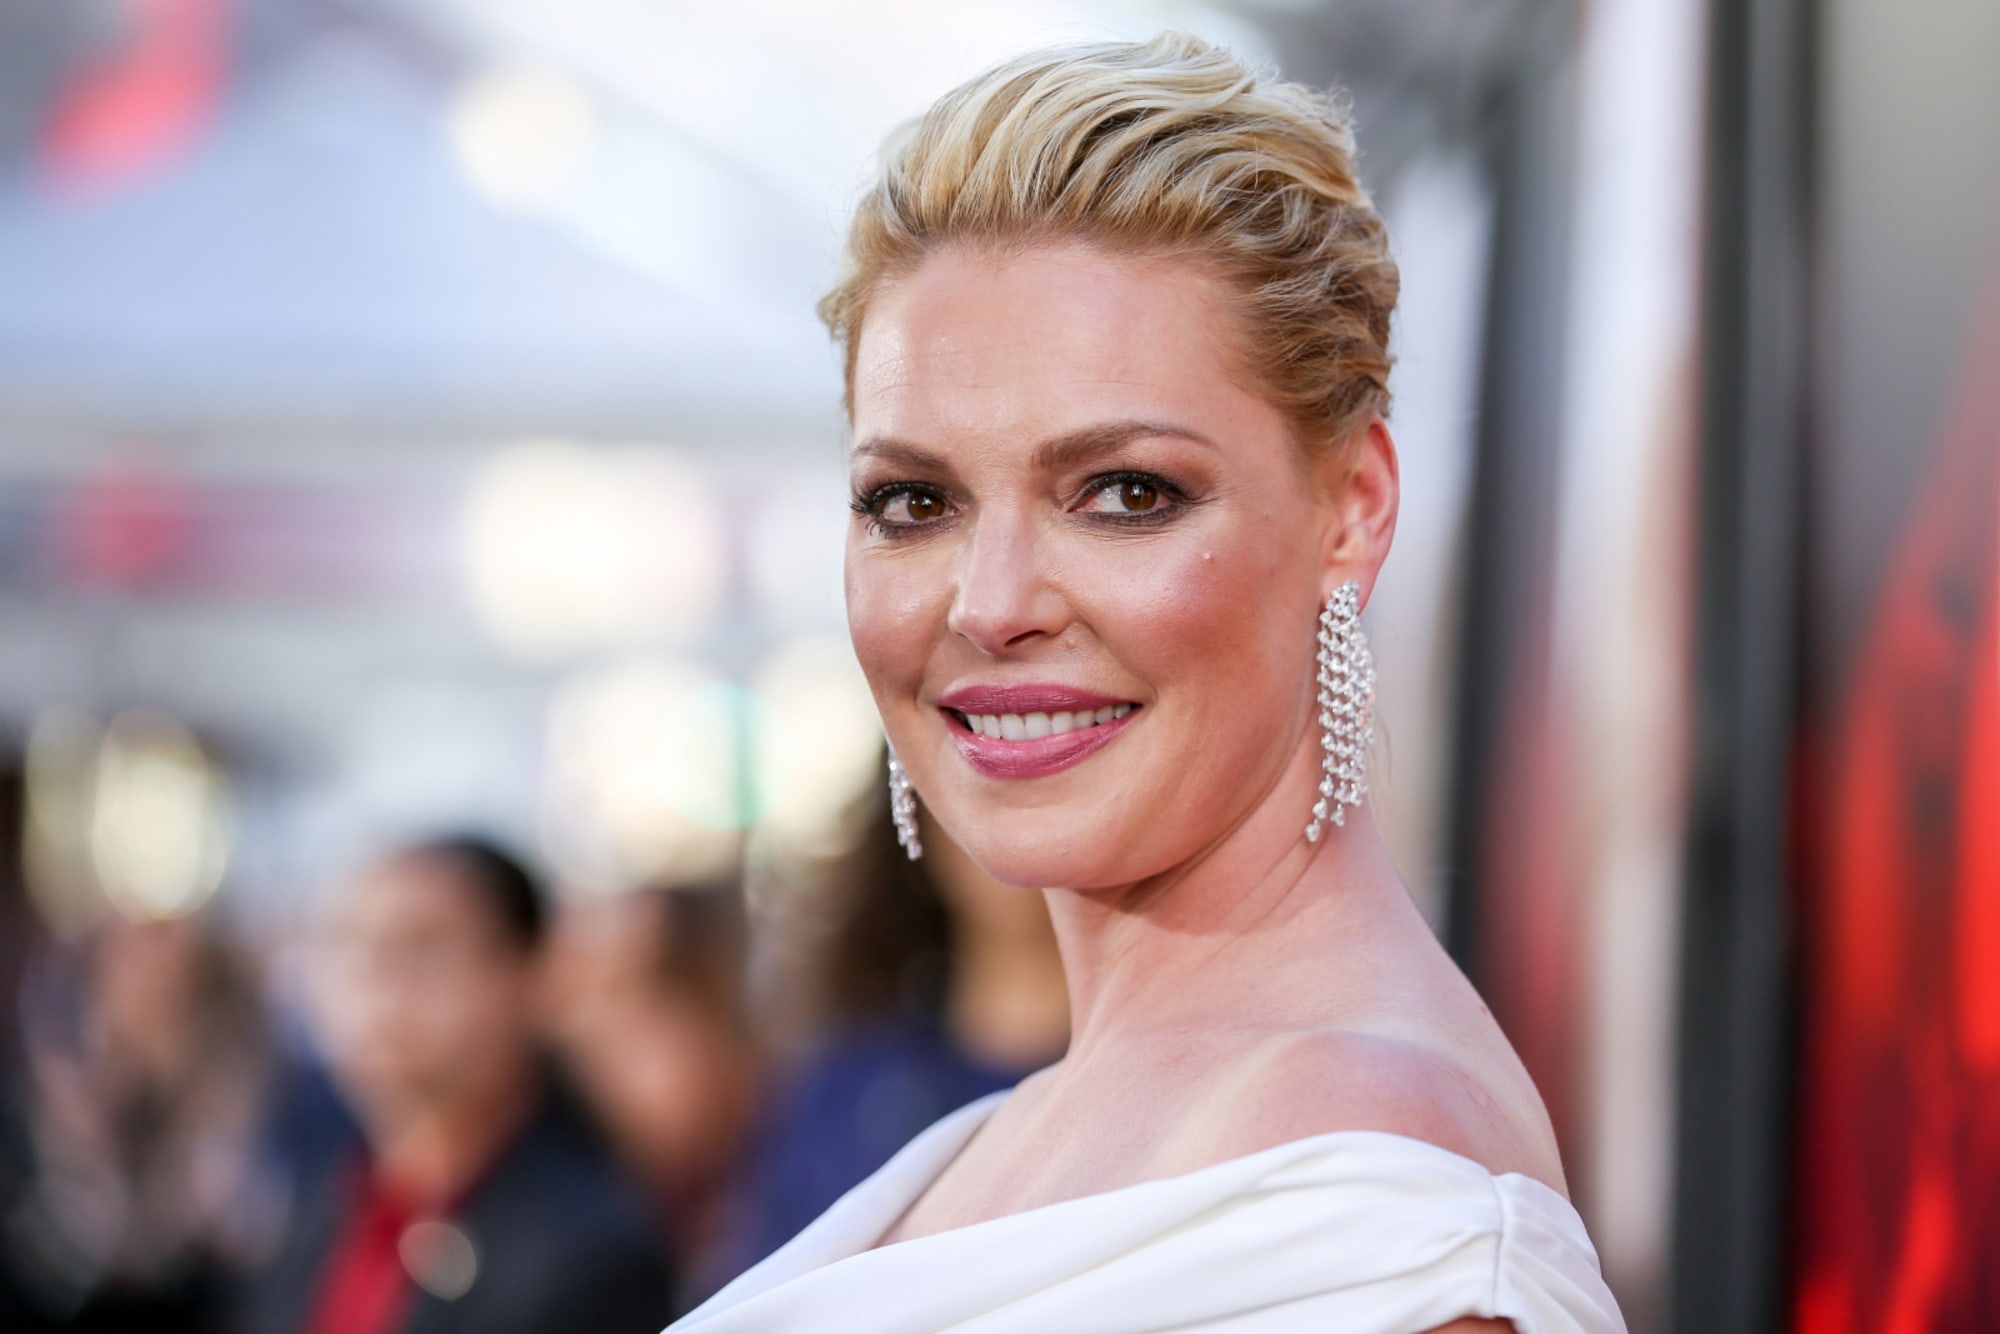 The Best Katherine Heigl Movies and Shows (And Where To Stream Them)

+2023